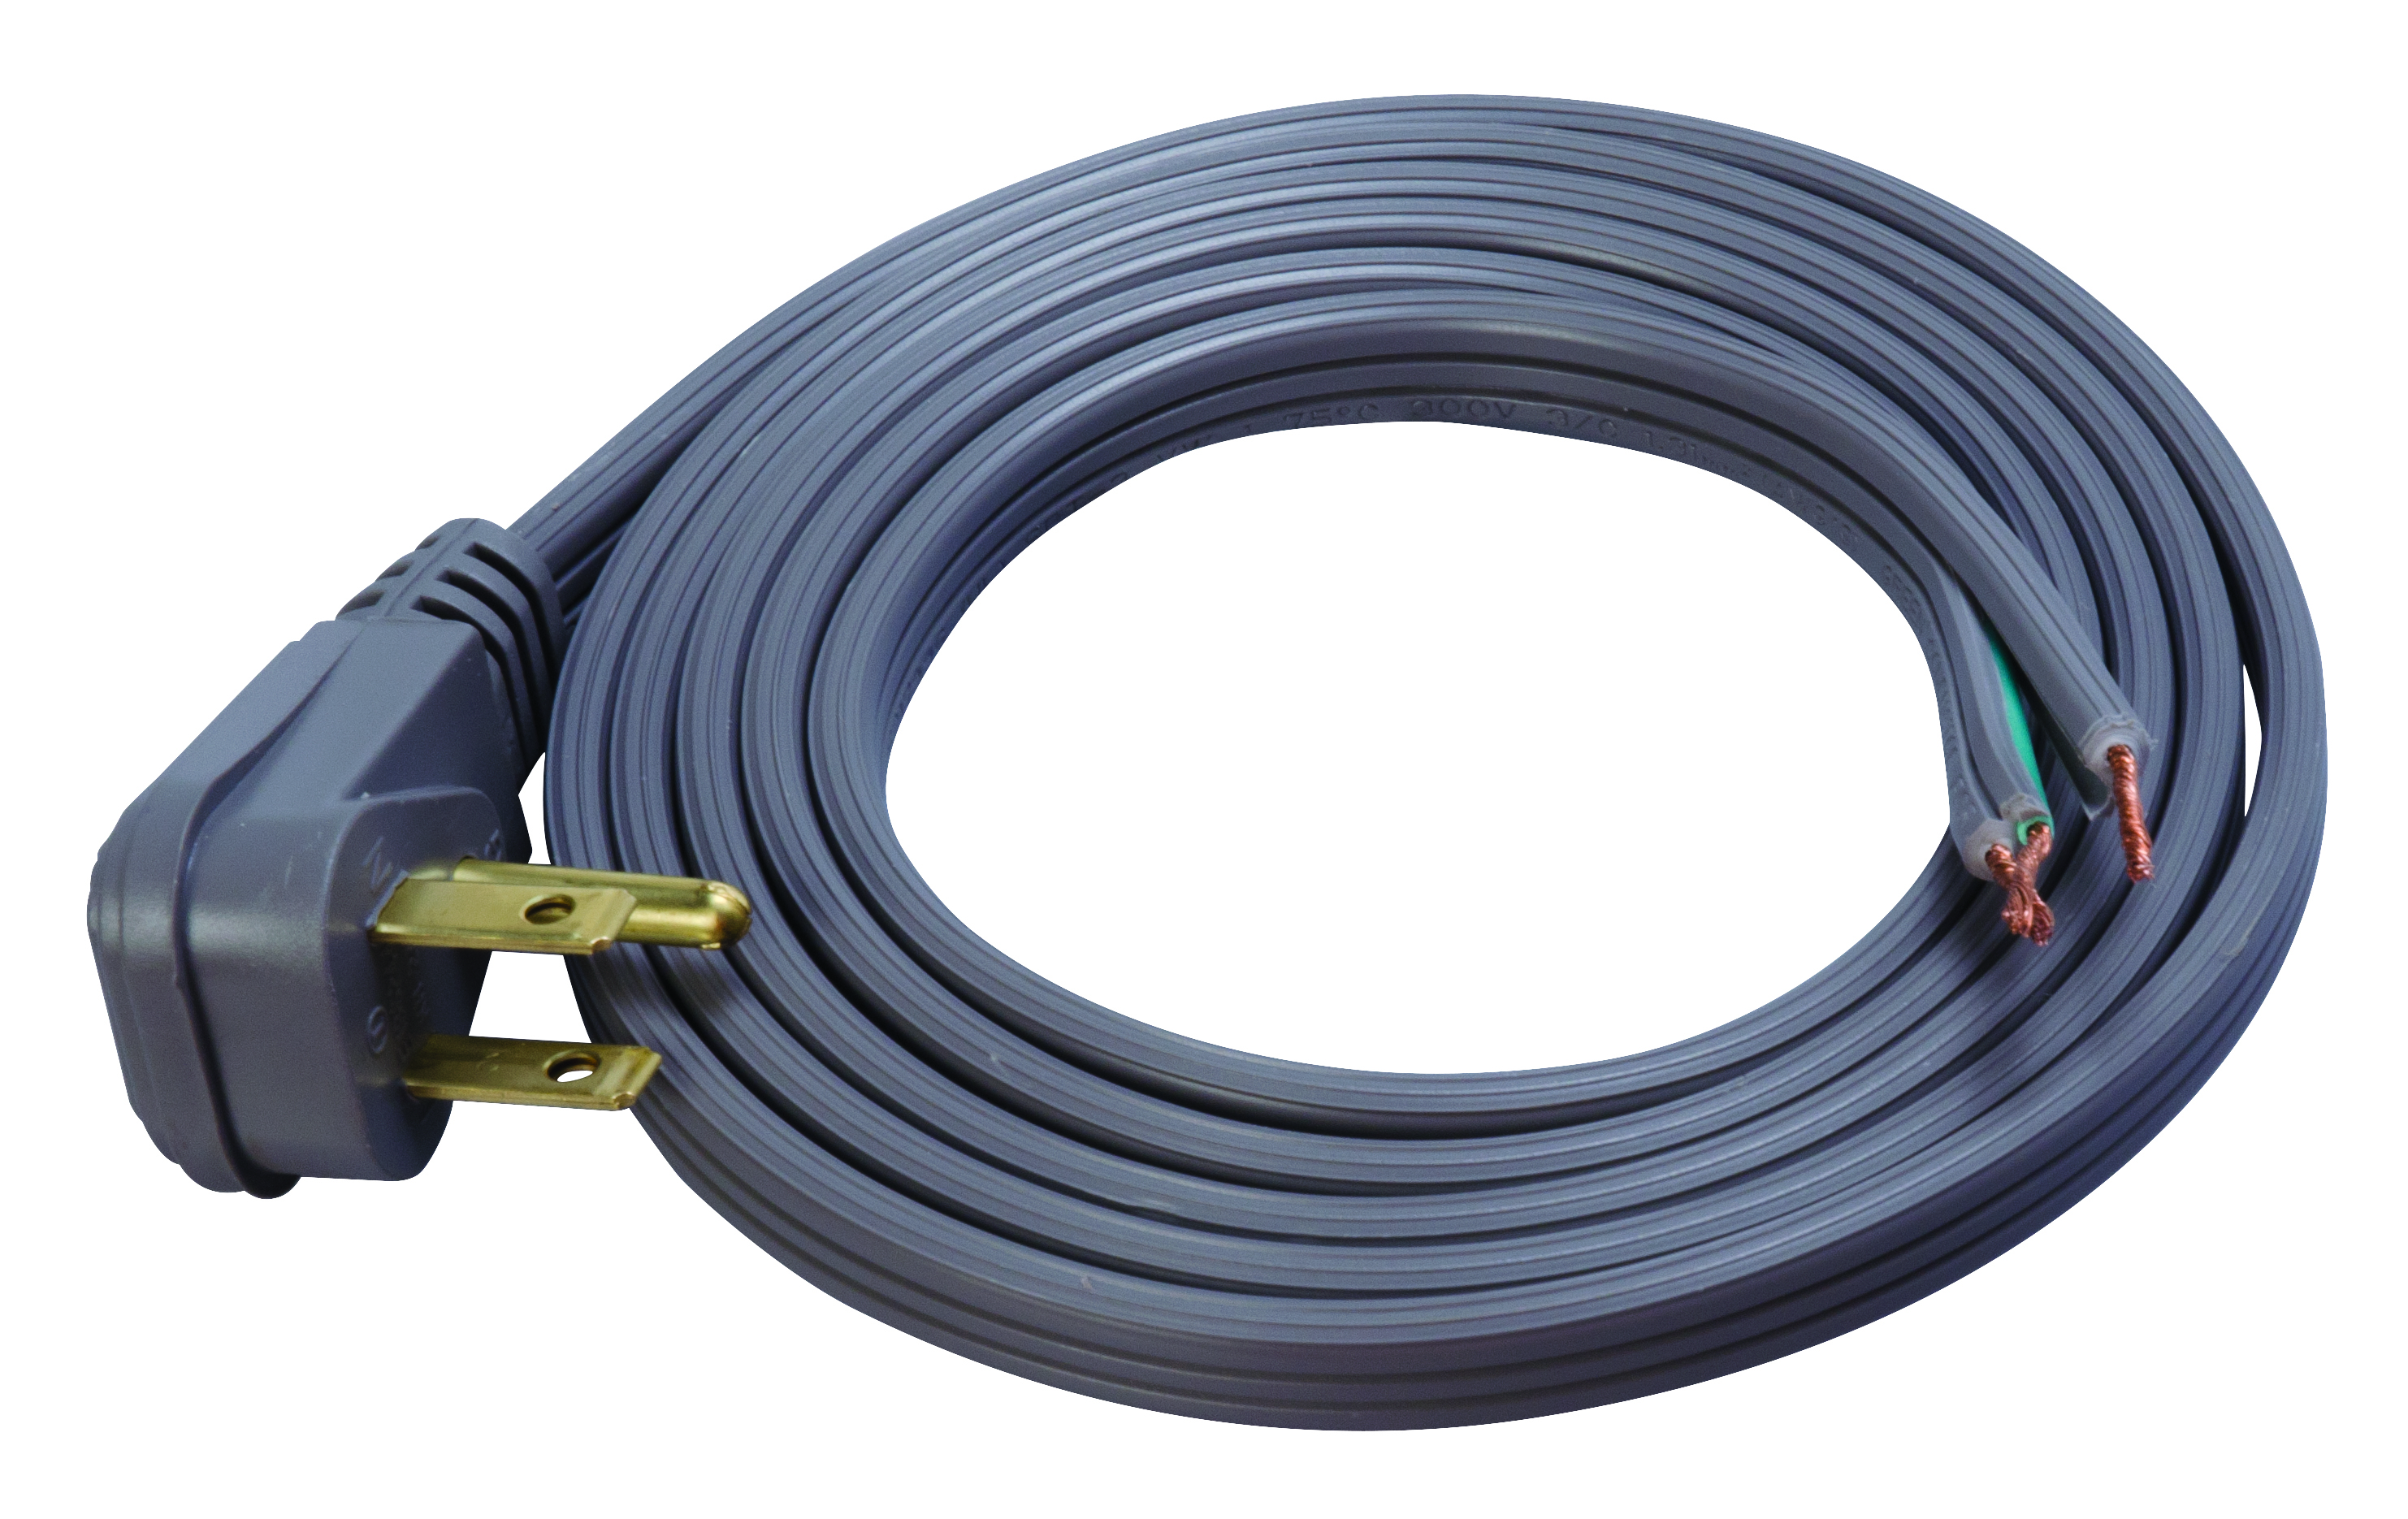 Glow End Extension Cord, 25-Foot - EXC2515